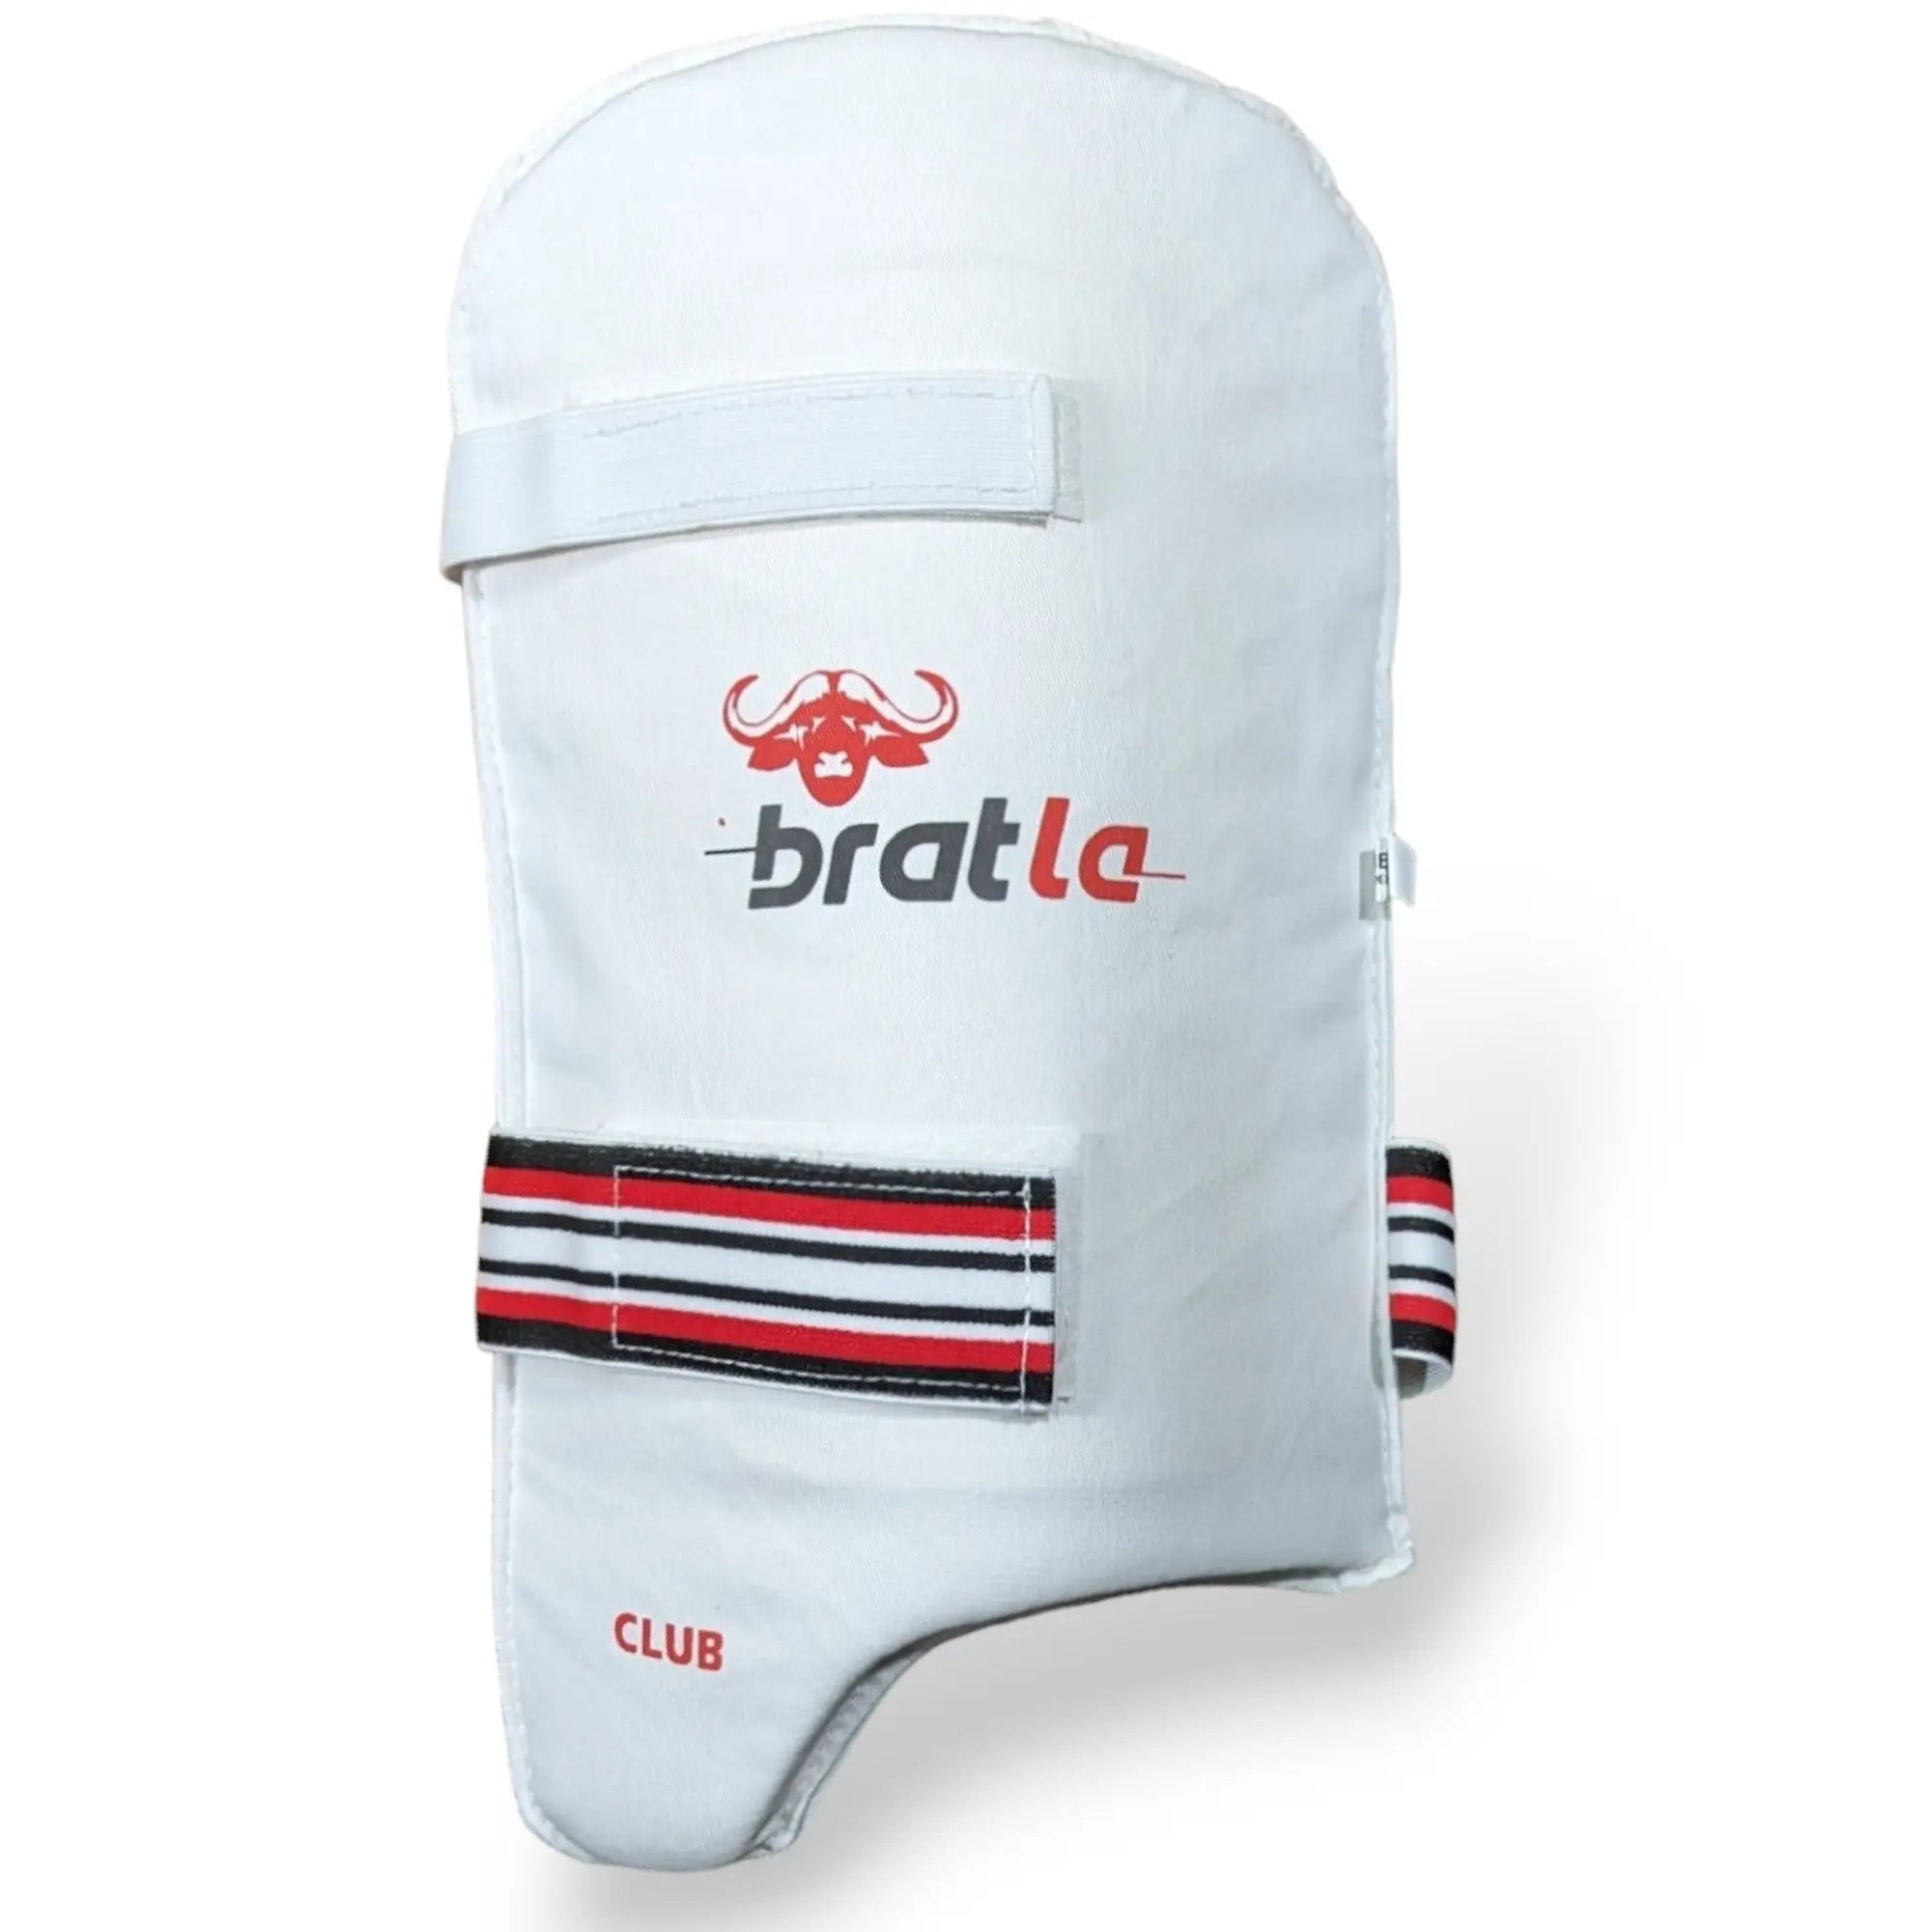 Cricket Club Thigh Pad Protector Foam Padded Super Lightweight - Adult RH - BODY PROTECTORS - THIGH GUARD